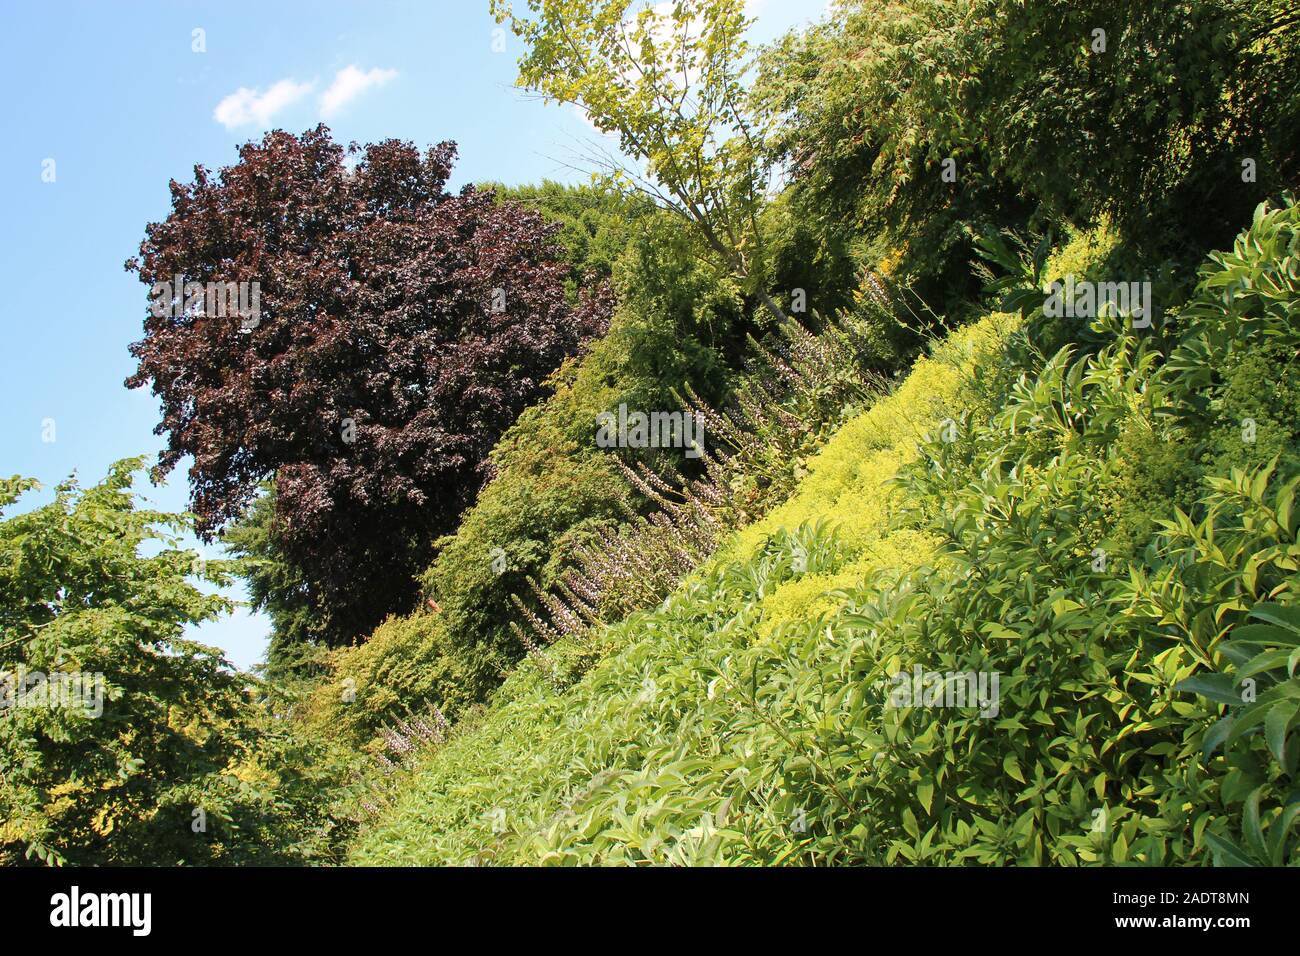 public garden in avranches in normandy (france) Stock Photo